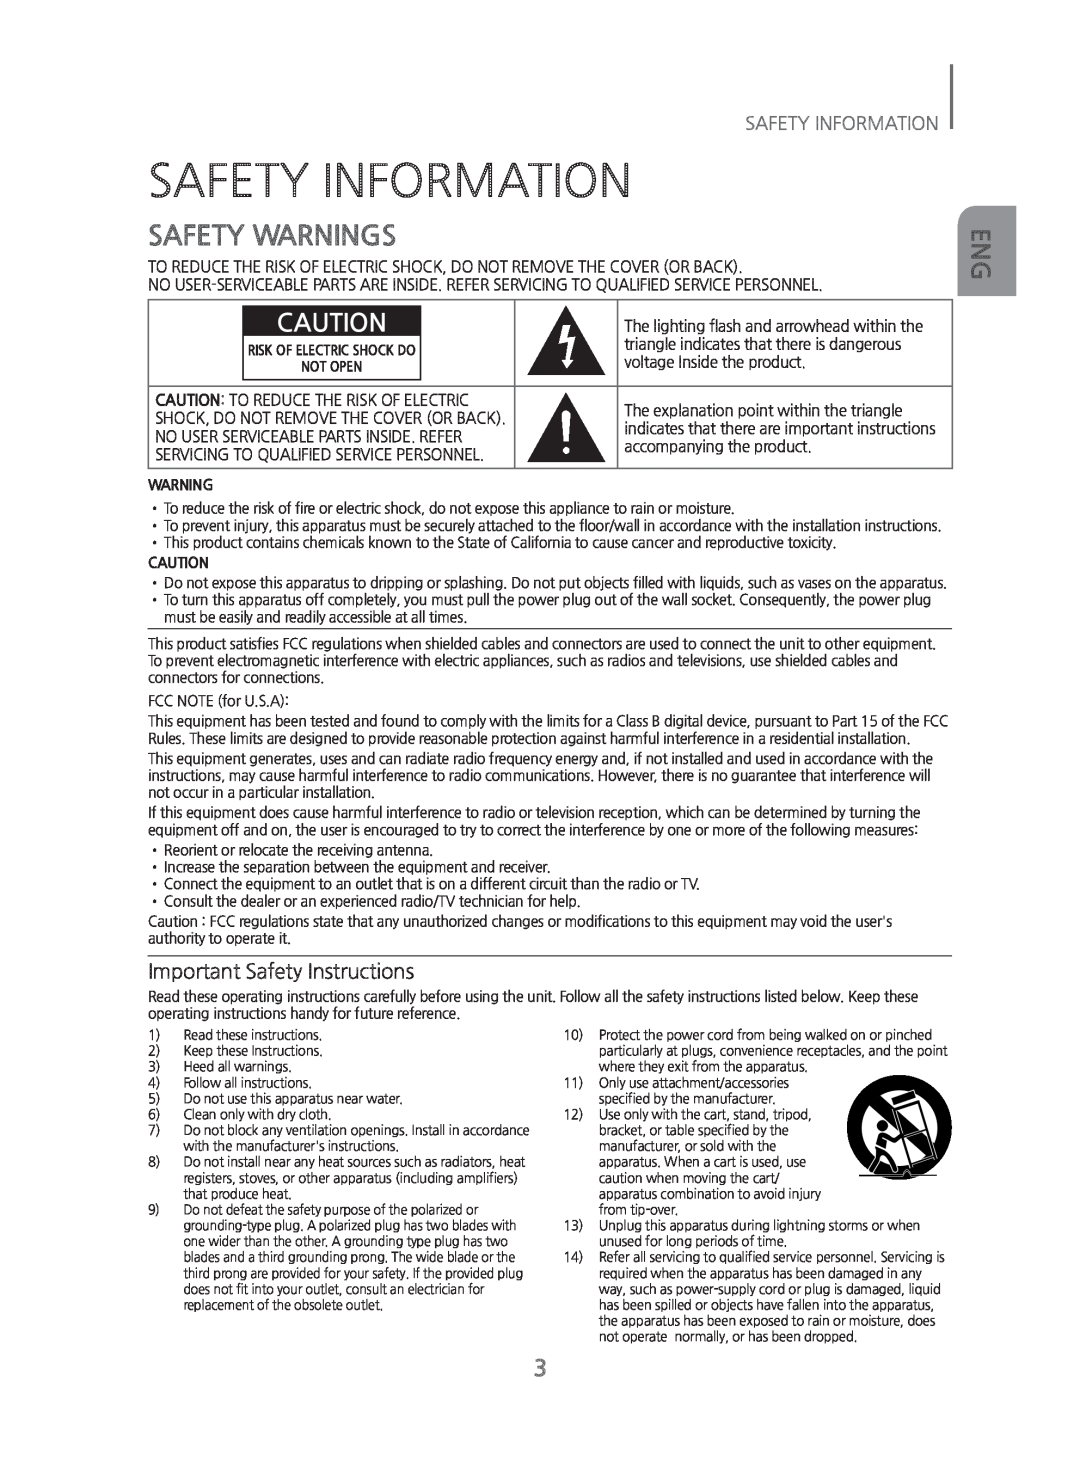 Samsung HW-H750/ZA manual Safety Information, Safety Warnings, Important Safety Instructions 